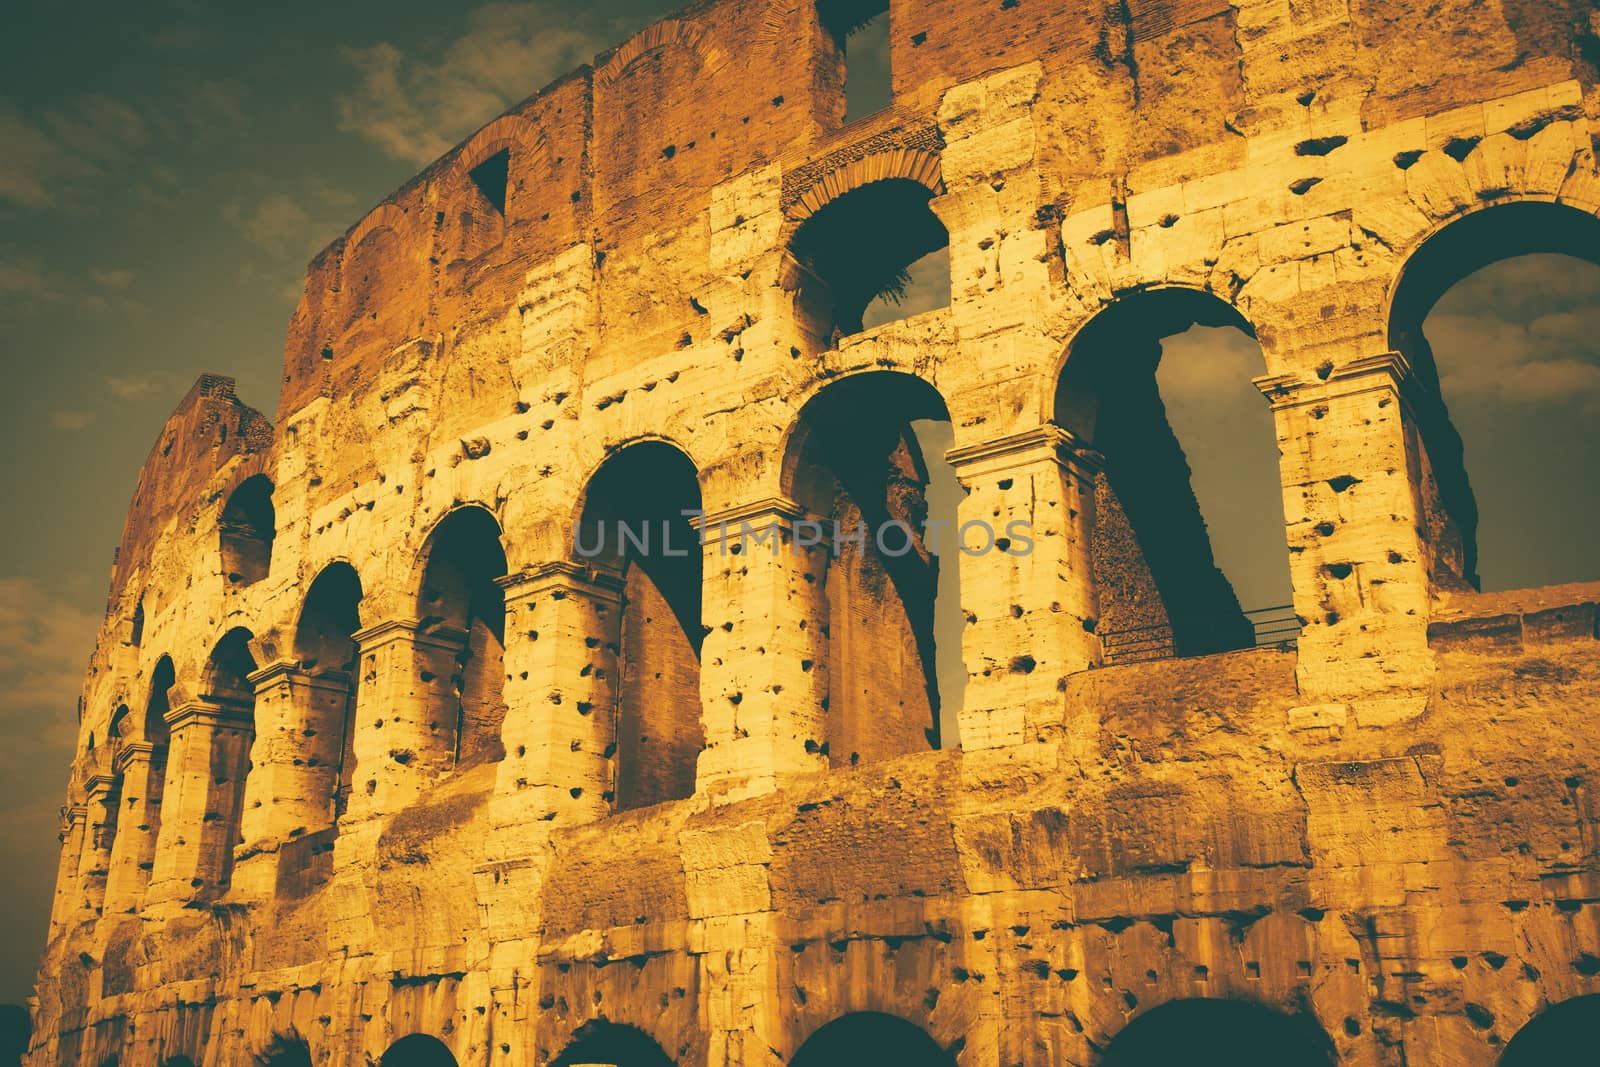 The Colosseum in Rome Italy done in an old film style.